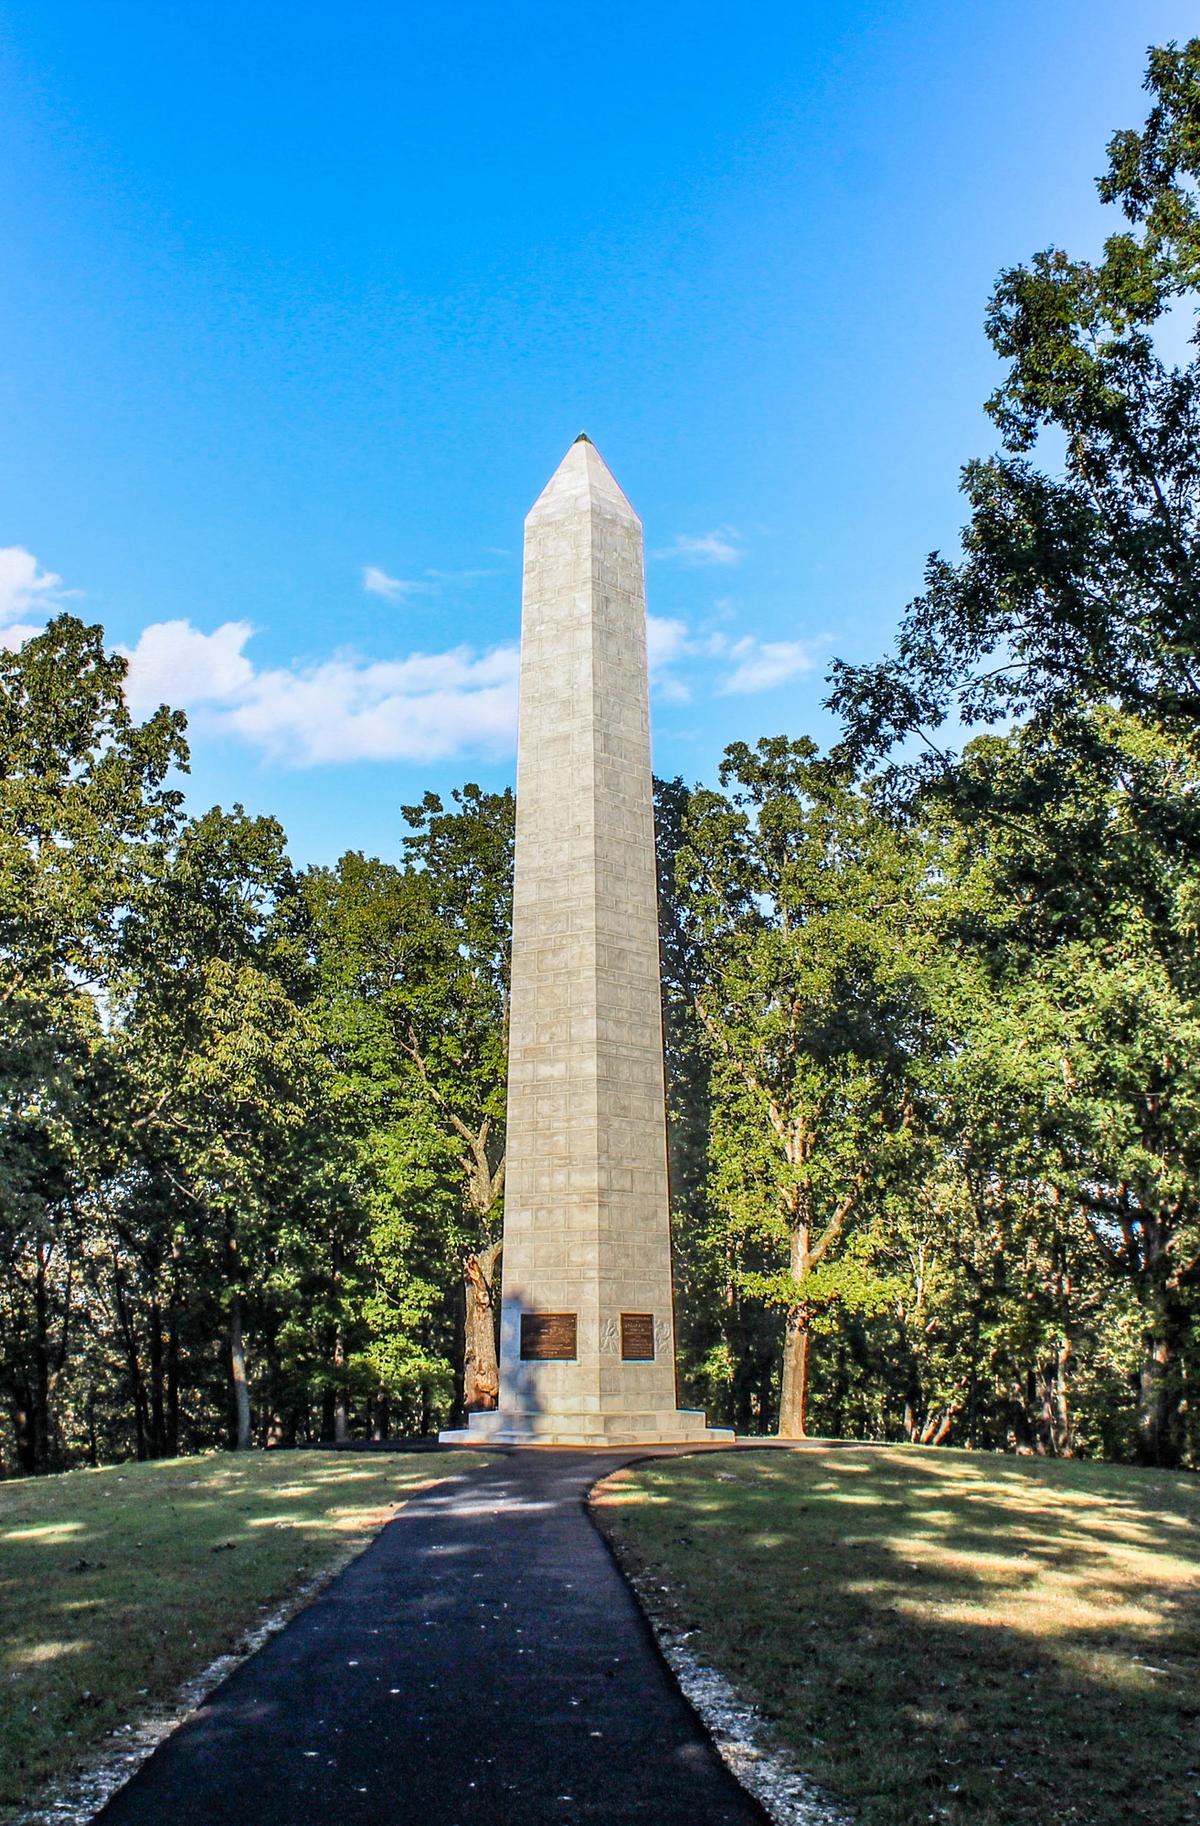 The obelisk memorial at Kings Mountain National Military Park. (NPS/Victoria Stauffenberg)